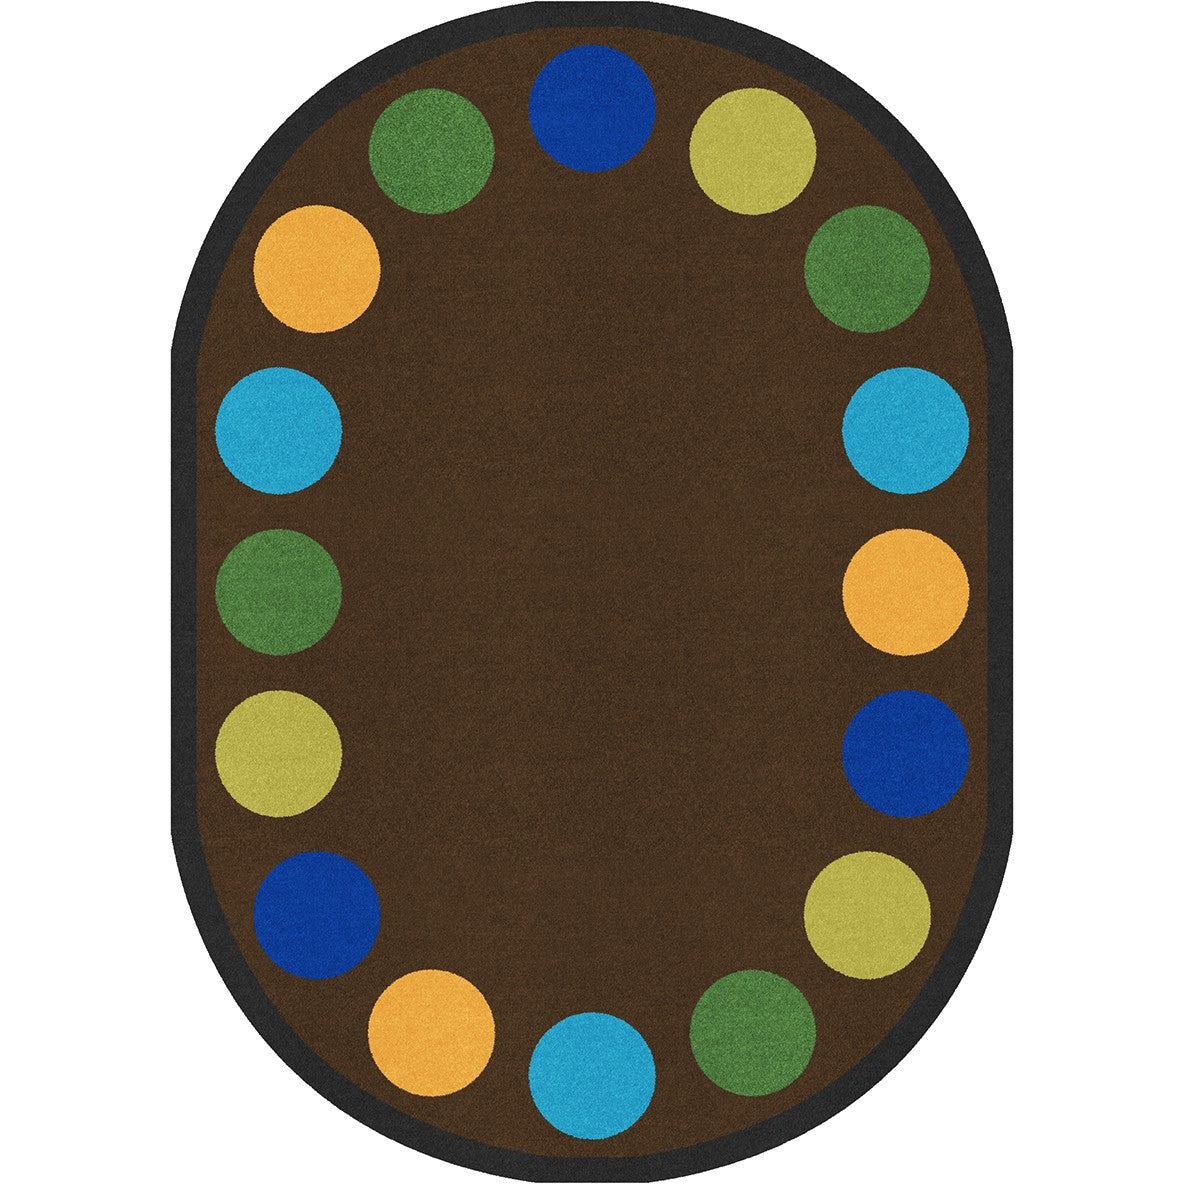 Lots of Dots™ Rug, 7'8" x 10'9" Oval, (16 dots)